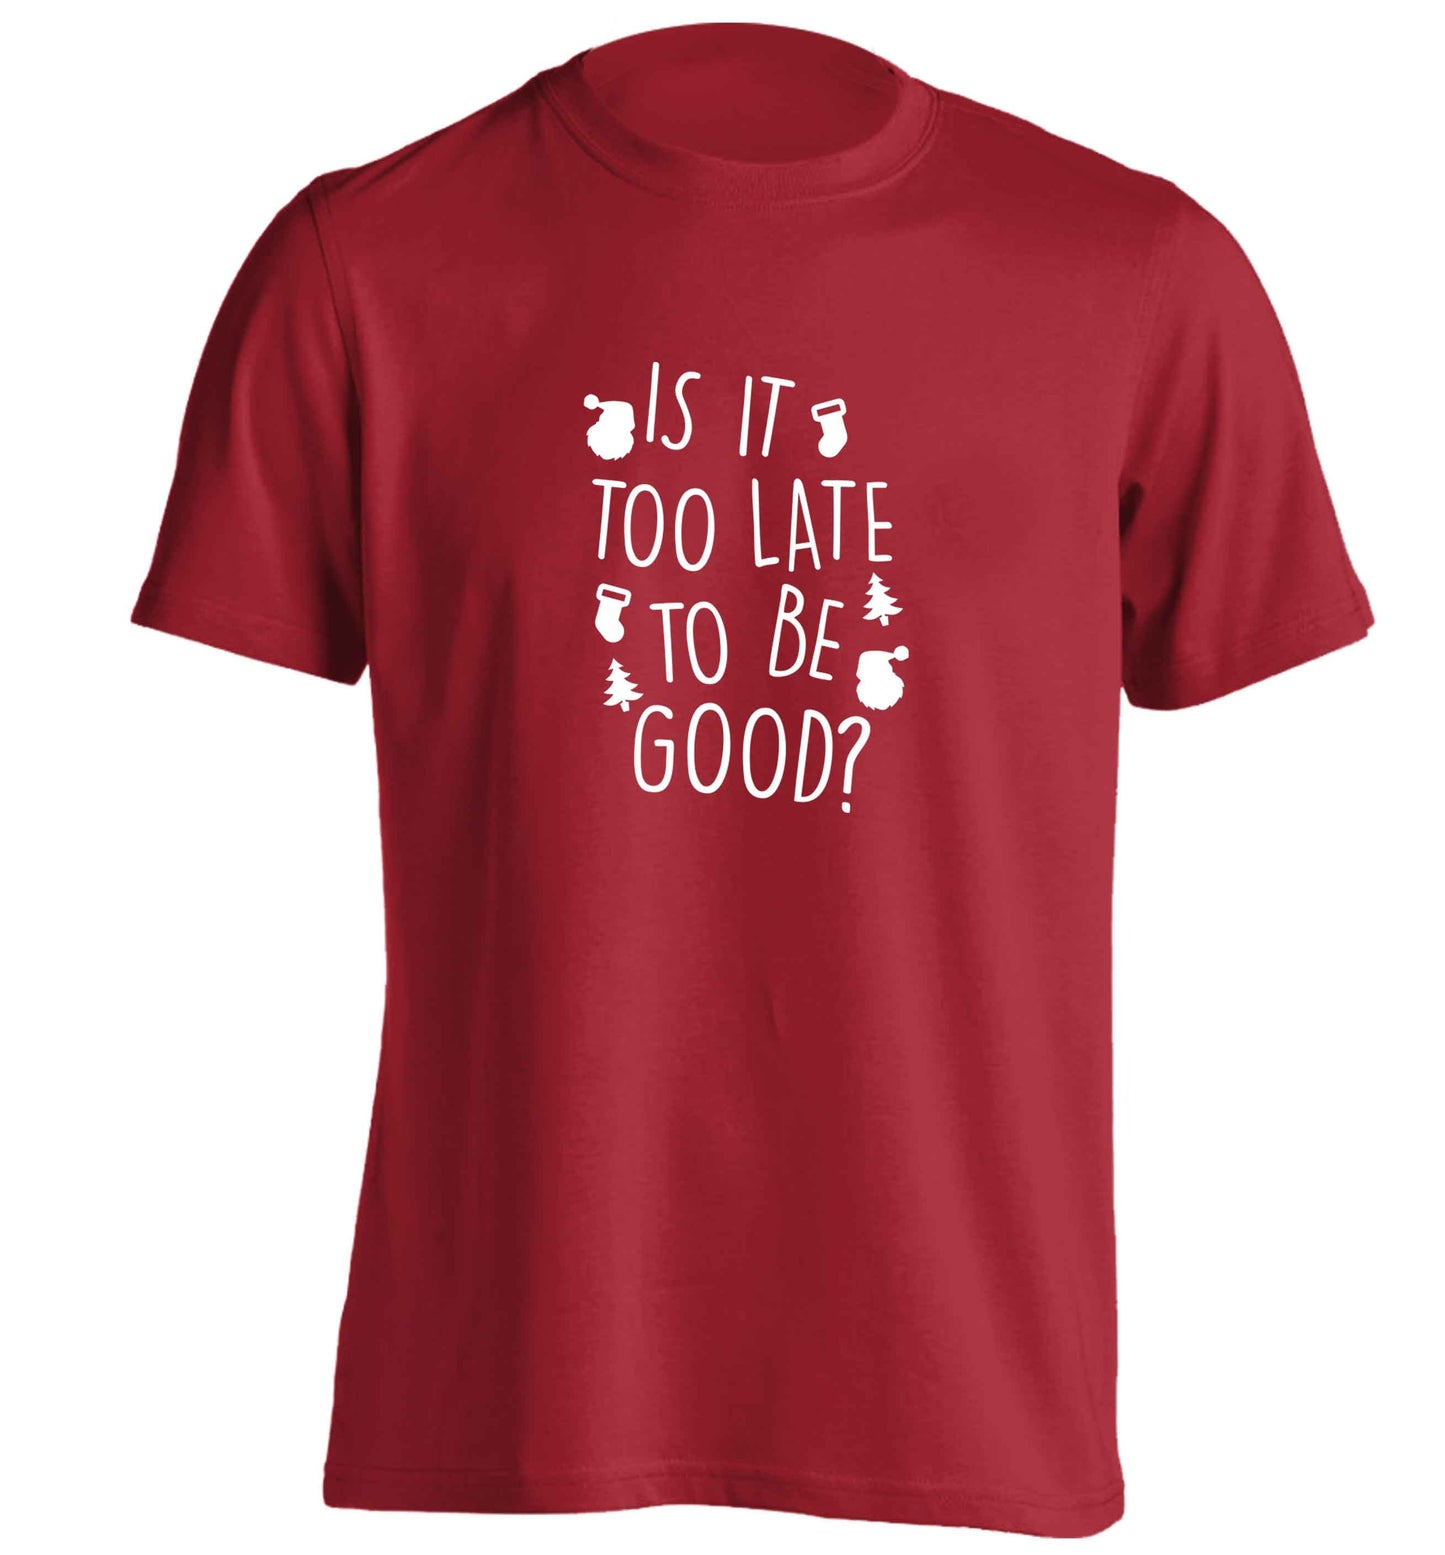 Too Late to be Good adults unisex red Tshirt 2XL